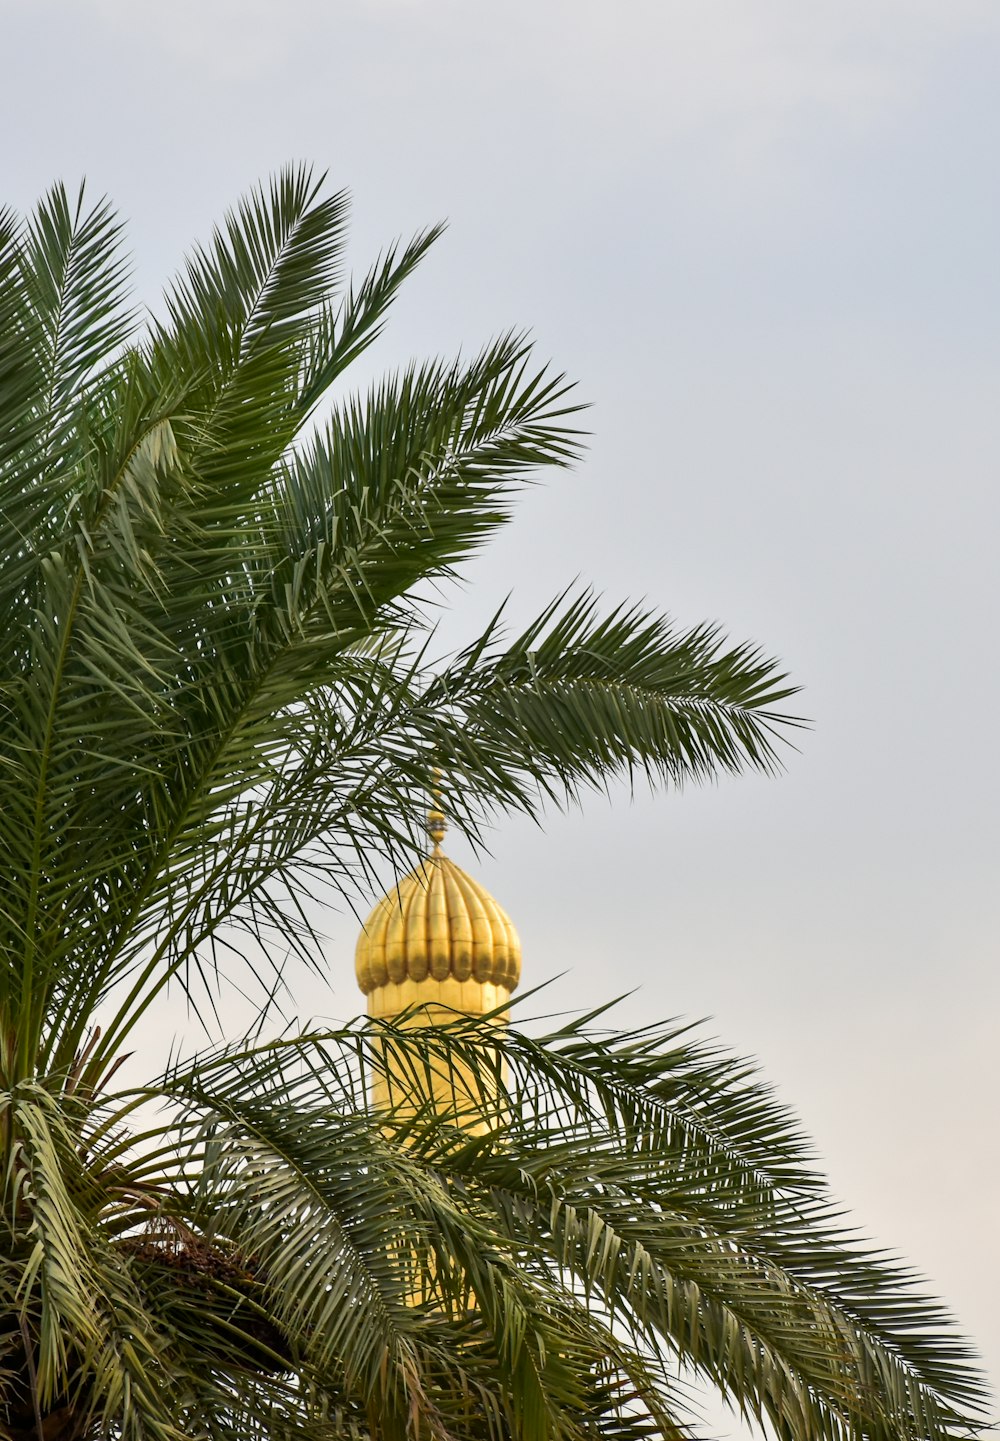 yellow round ball on palm tree during daytime